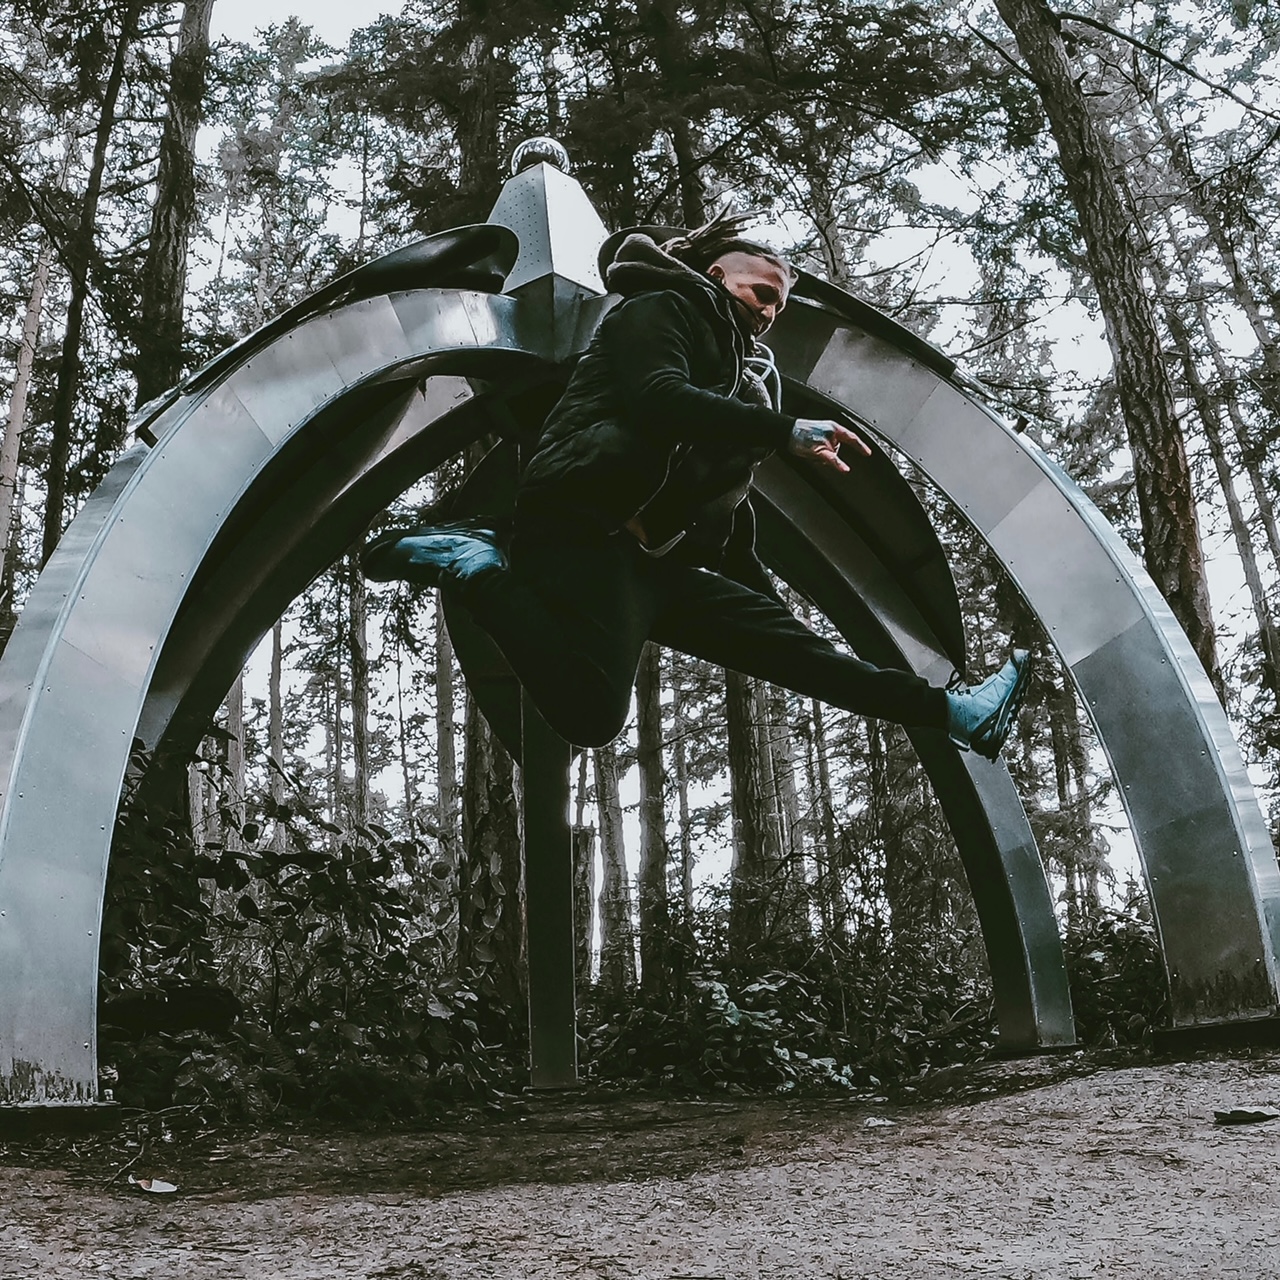 Jamie Webster of Clinton WA jumps for joy in front of Gary Gunderson's Pentillium at Price Sculpture Forest